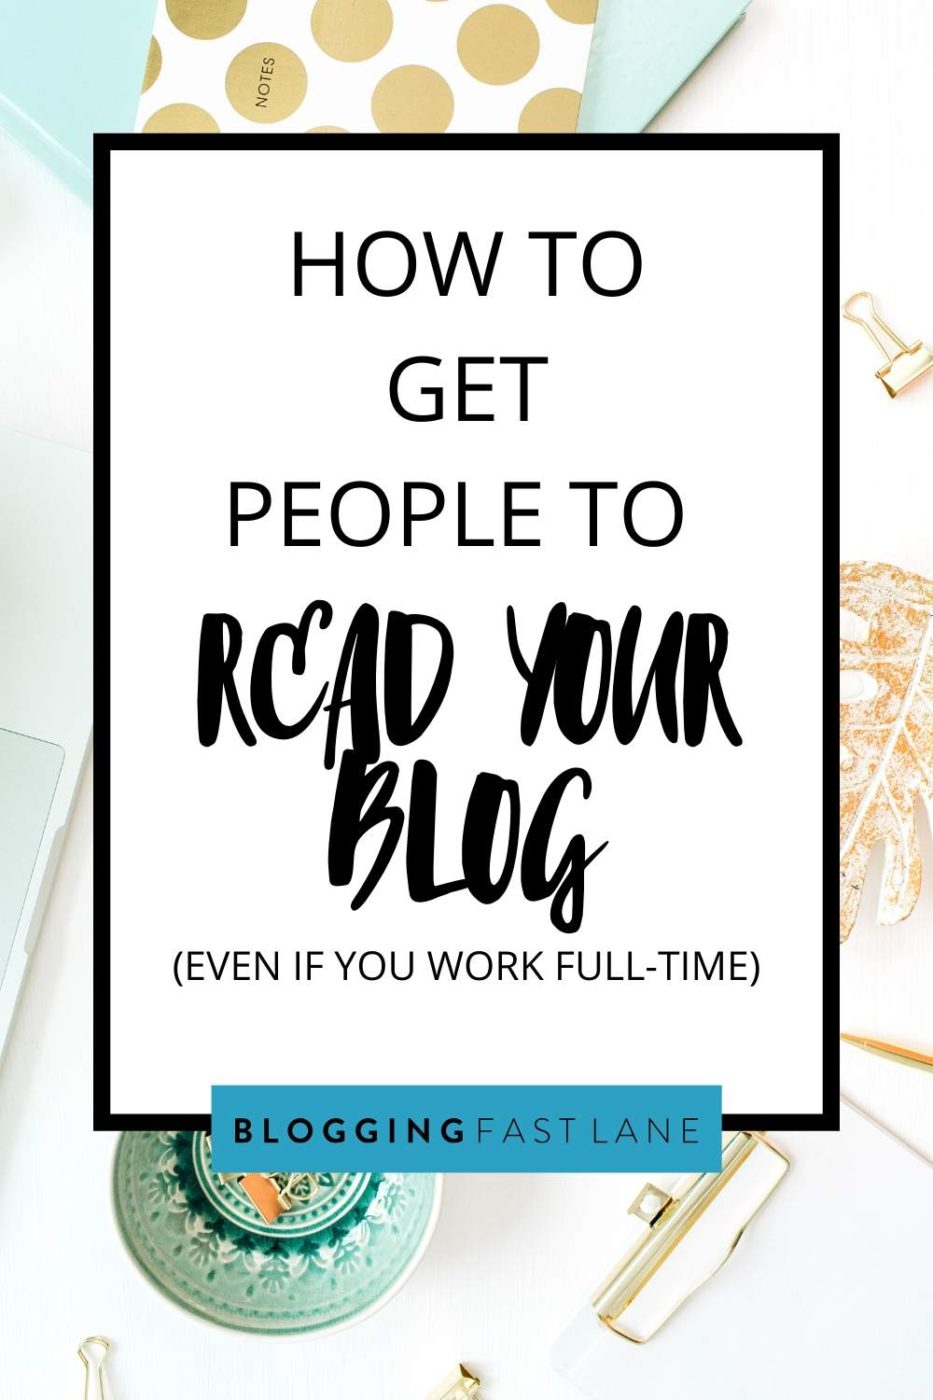 How to Get People to Read Your Blog | Building a blog on the side and trying to grow your traffic? Here's how!